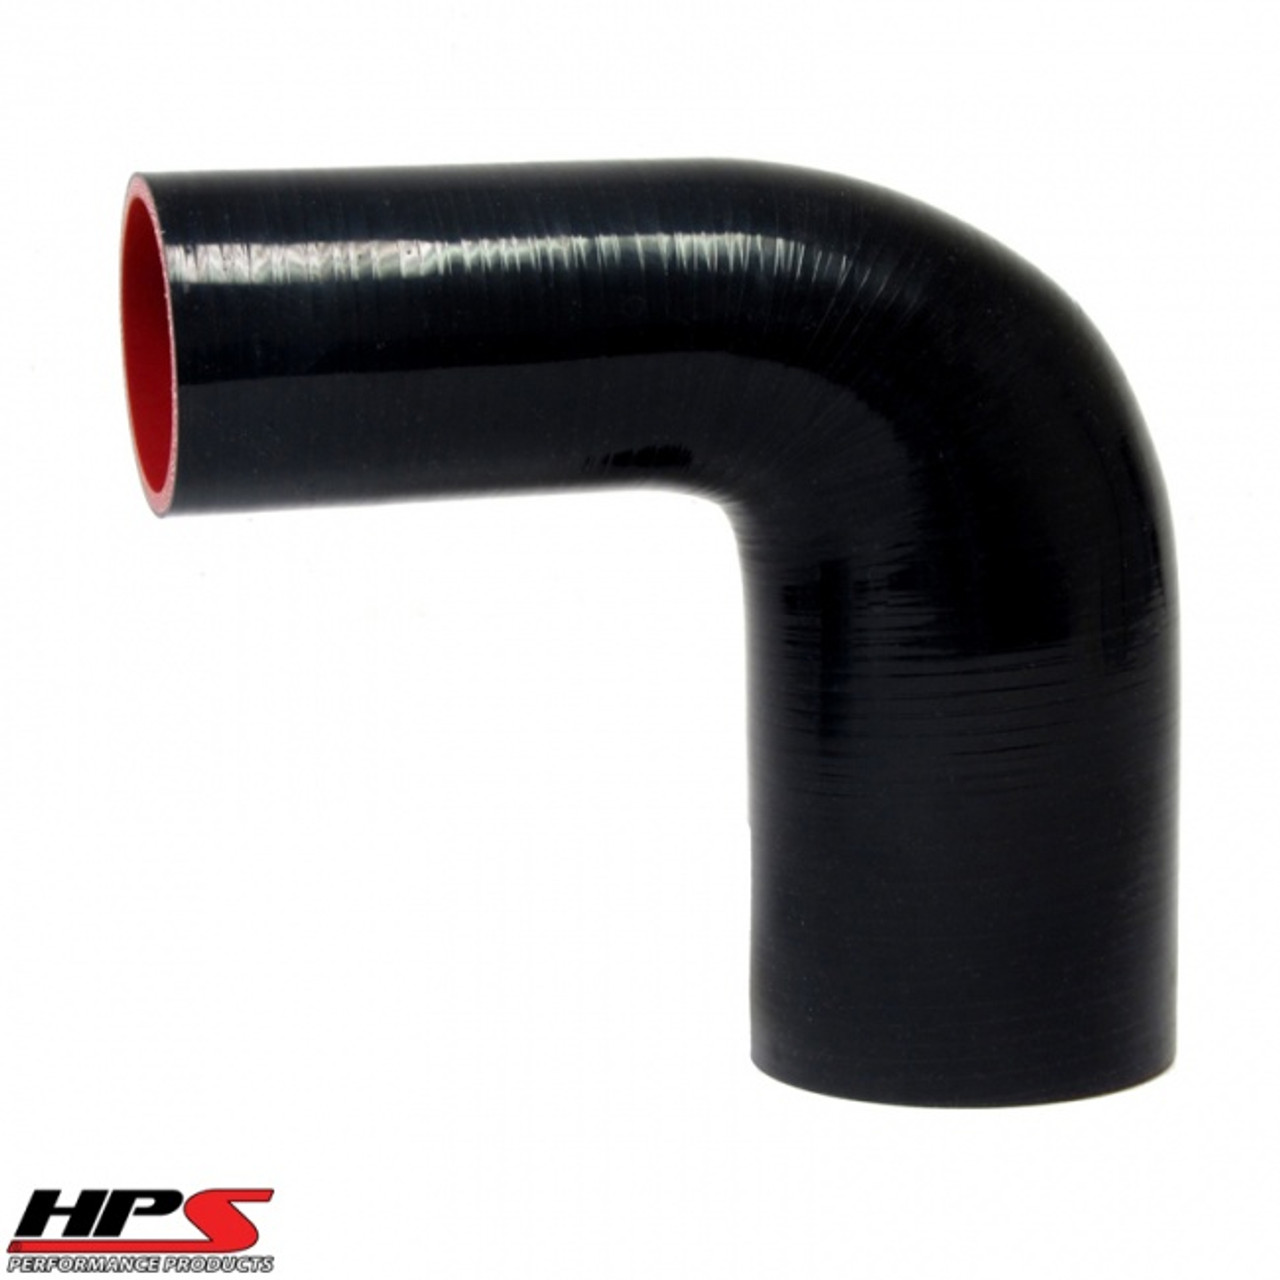 HPS 4 Ply Reinforced 90 Degree Silicone Hose Adapter 2.25" x 2.5" ID - Black